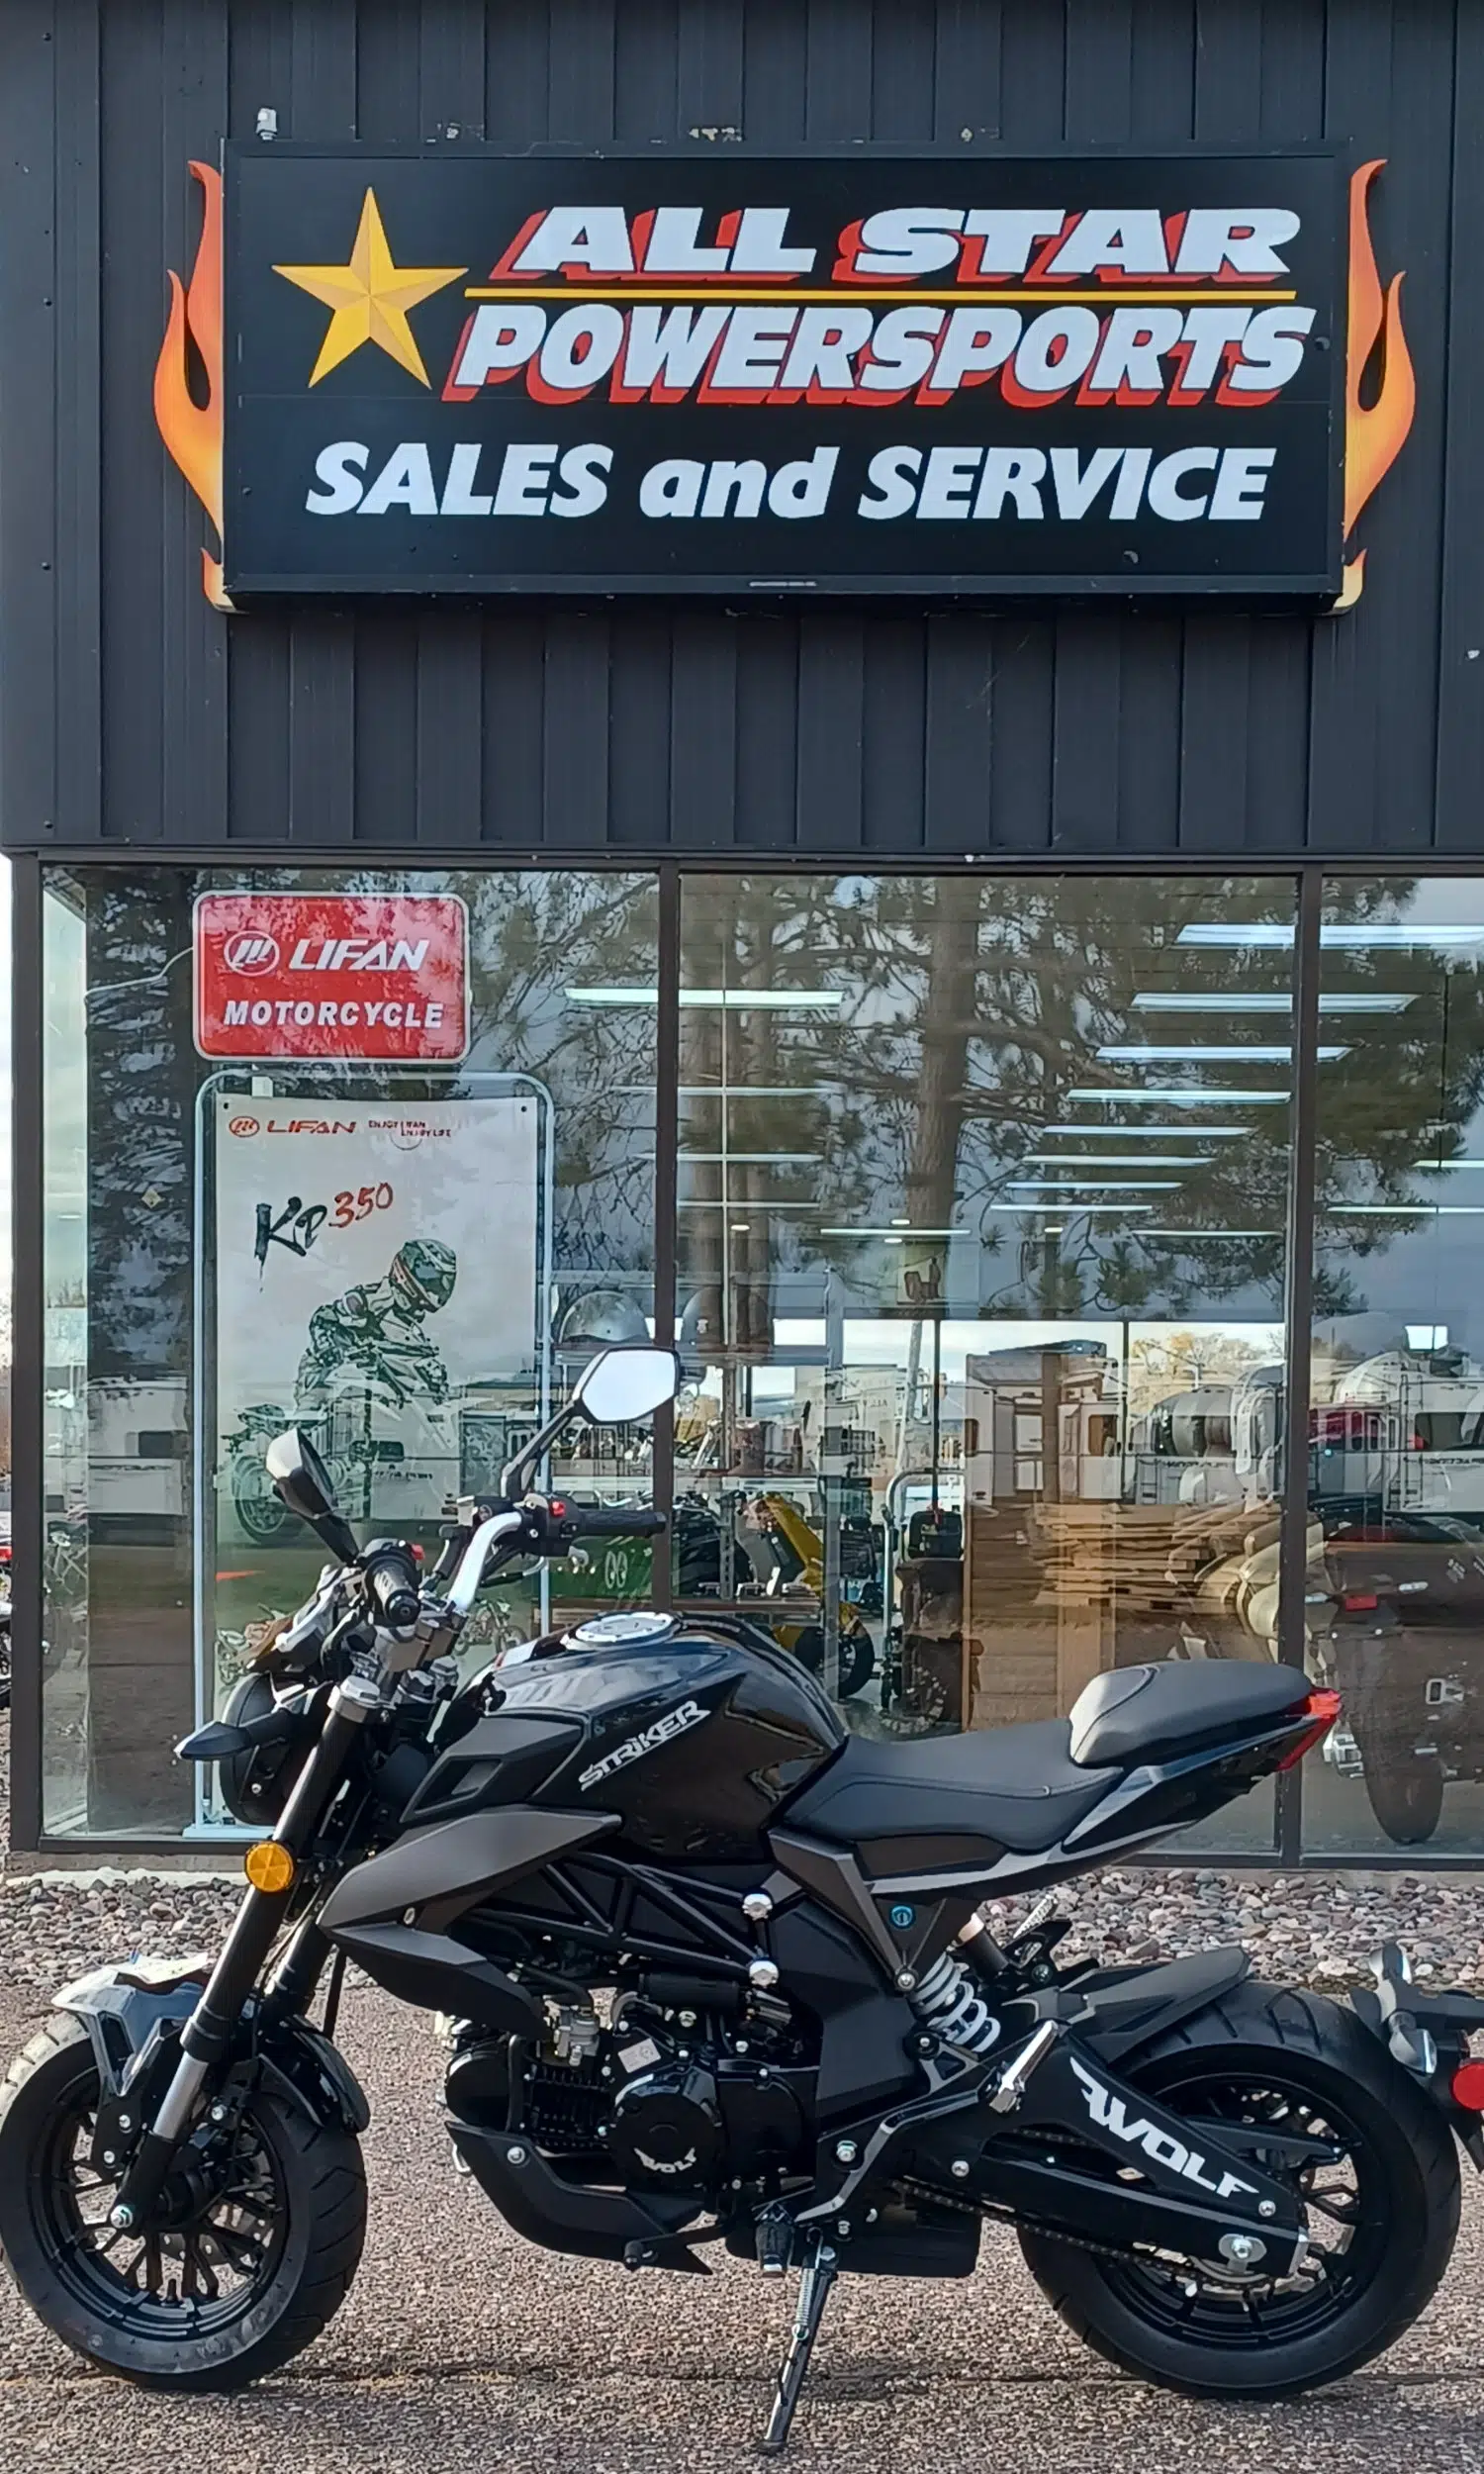 All Star Powersports Sales and Service